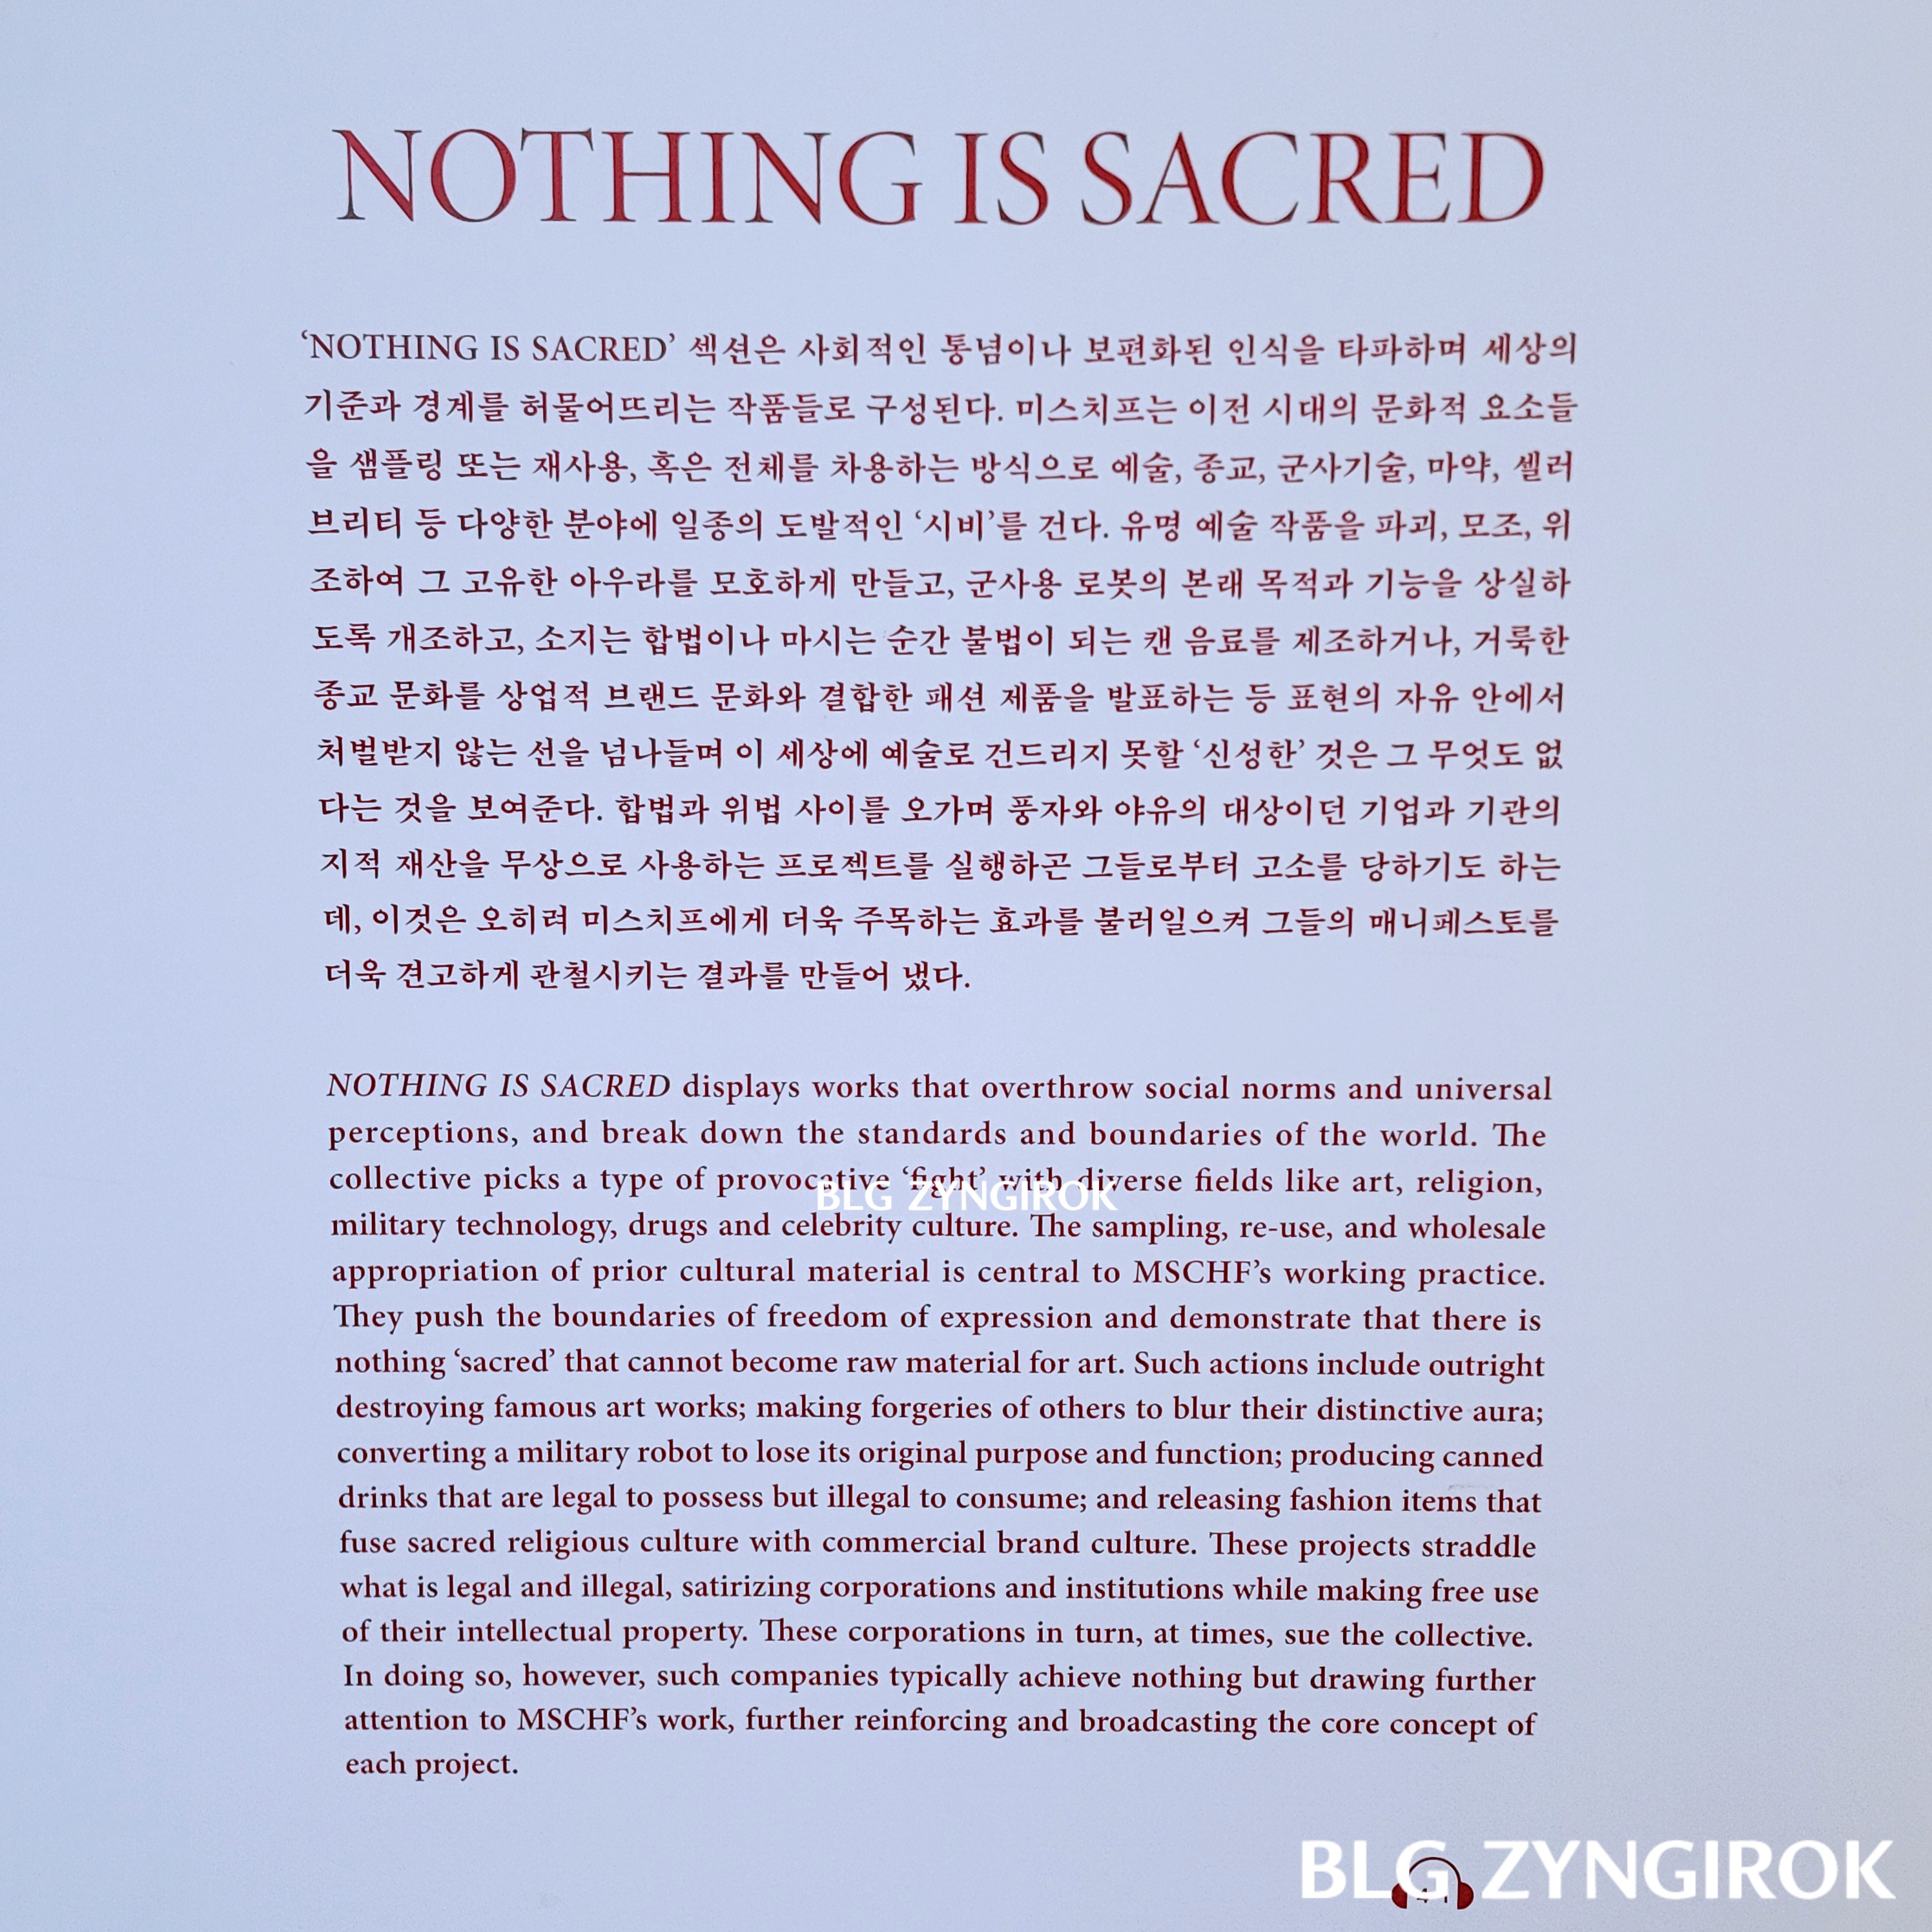 NOTHING IS SCARED 설명 모습이다.